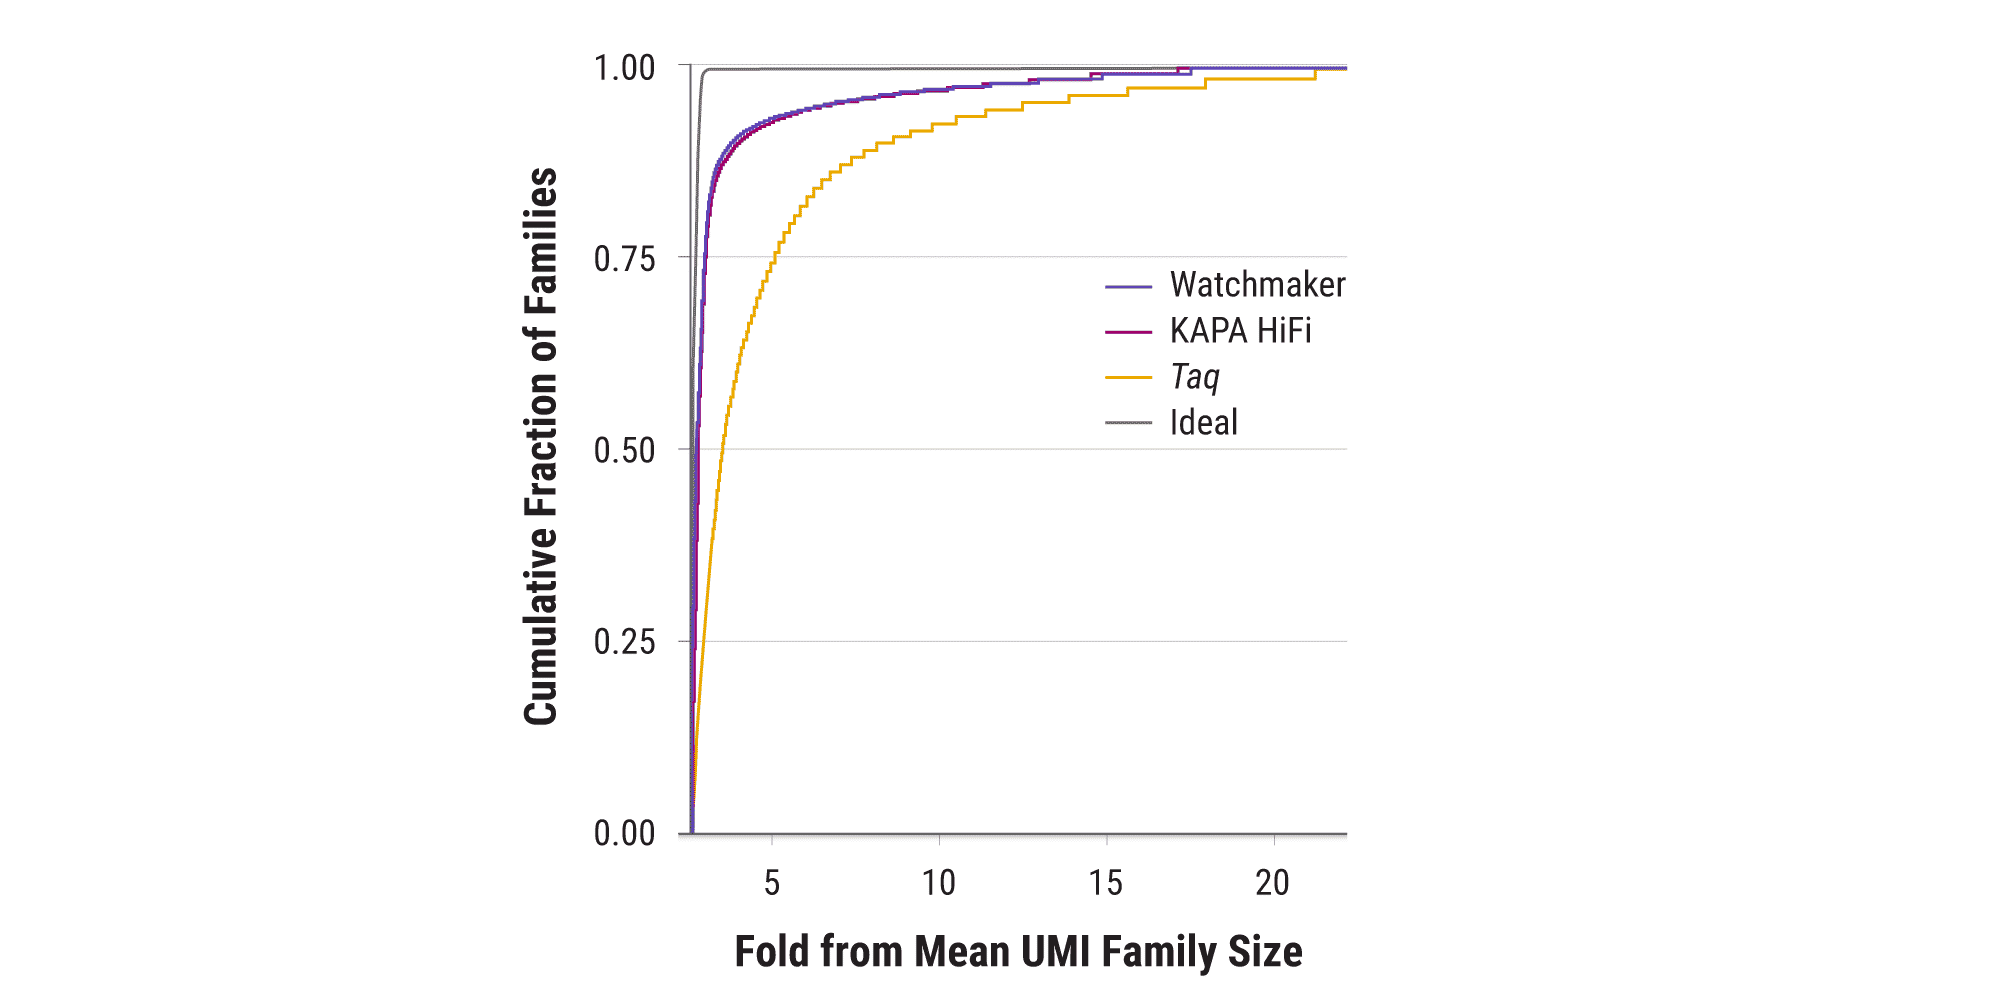 Figure 2A. Uniform coverage of UMI families. Whole-genome libraries were prepared from human gDNA using UMI-containing adapters and were quantified by qPCR. Libraries were diluted such that 80,000 library molecules were template for 26 cycles of library amplification using Equinox Library Amplification Kit, KAPA HiFi HotStart ReadyMix, or NEB 2X Taq Master Mix. Resulting libraries were sequenced on Illumina NovaSeq and subsampled to 9 million clusters. ‘Ideal’ line indicates completely uniform coverage across UMI families modeled with a Poisson distribution.